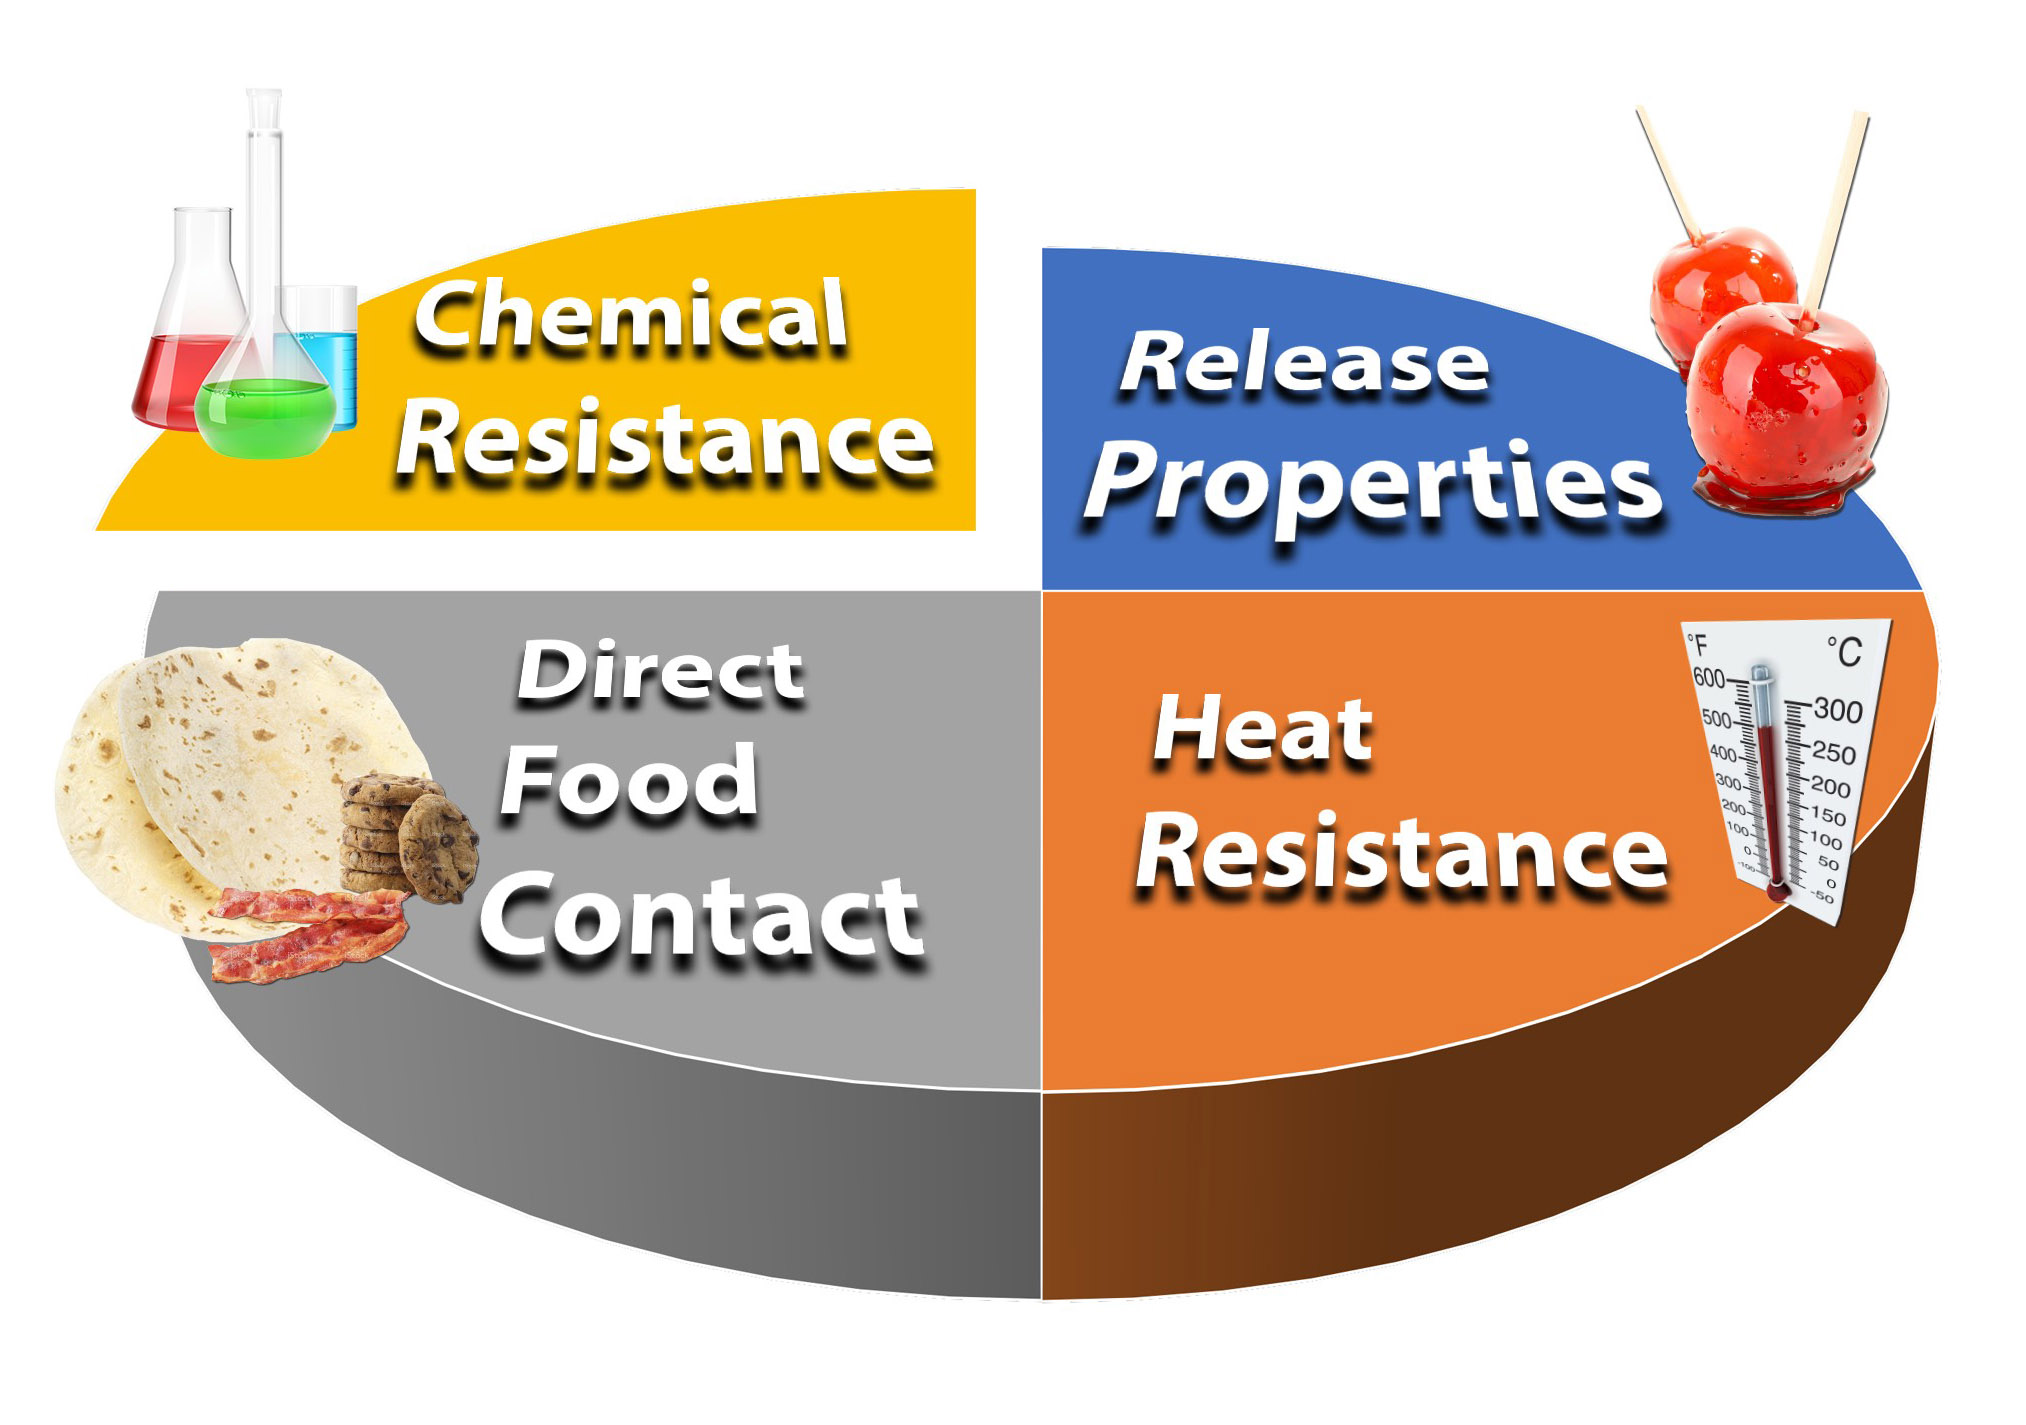 Uploaded Image: /uploads/Application Page Images/Pie Chart - Chemical Resistance.jpg